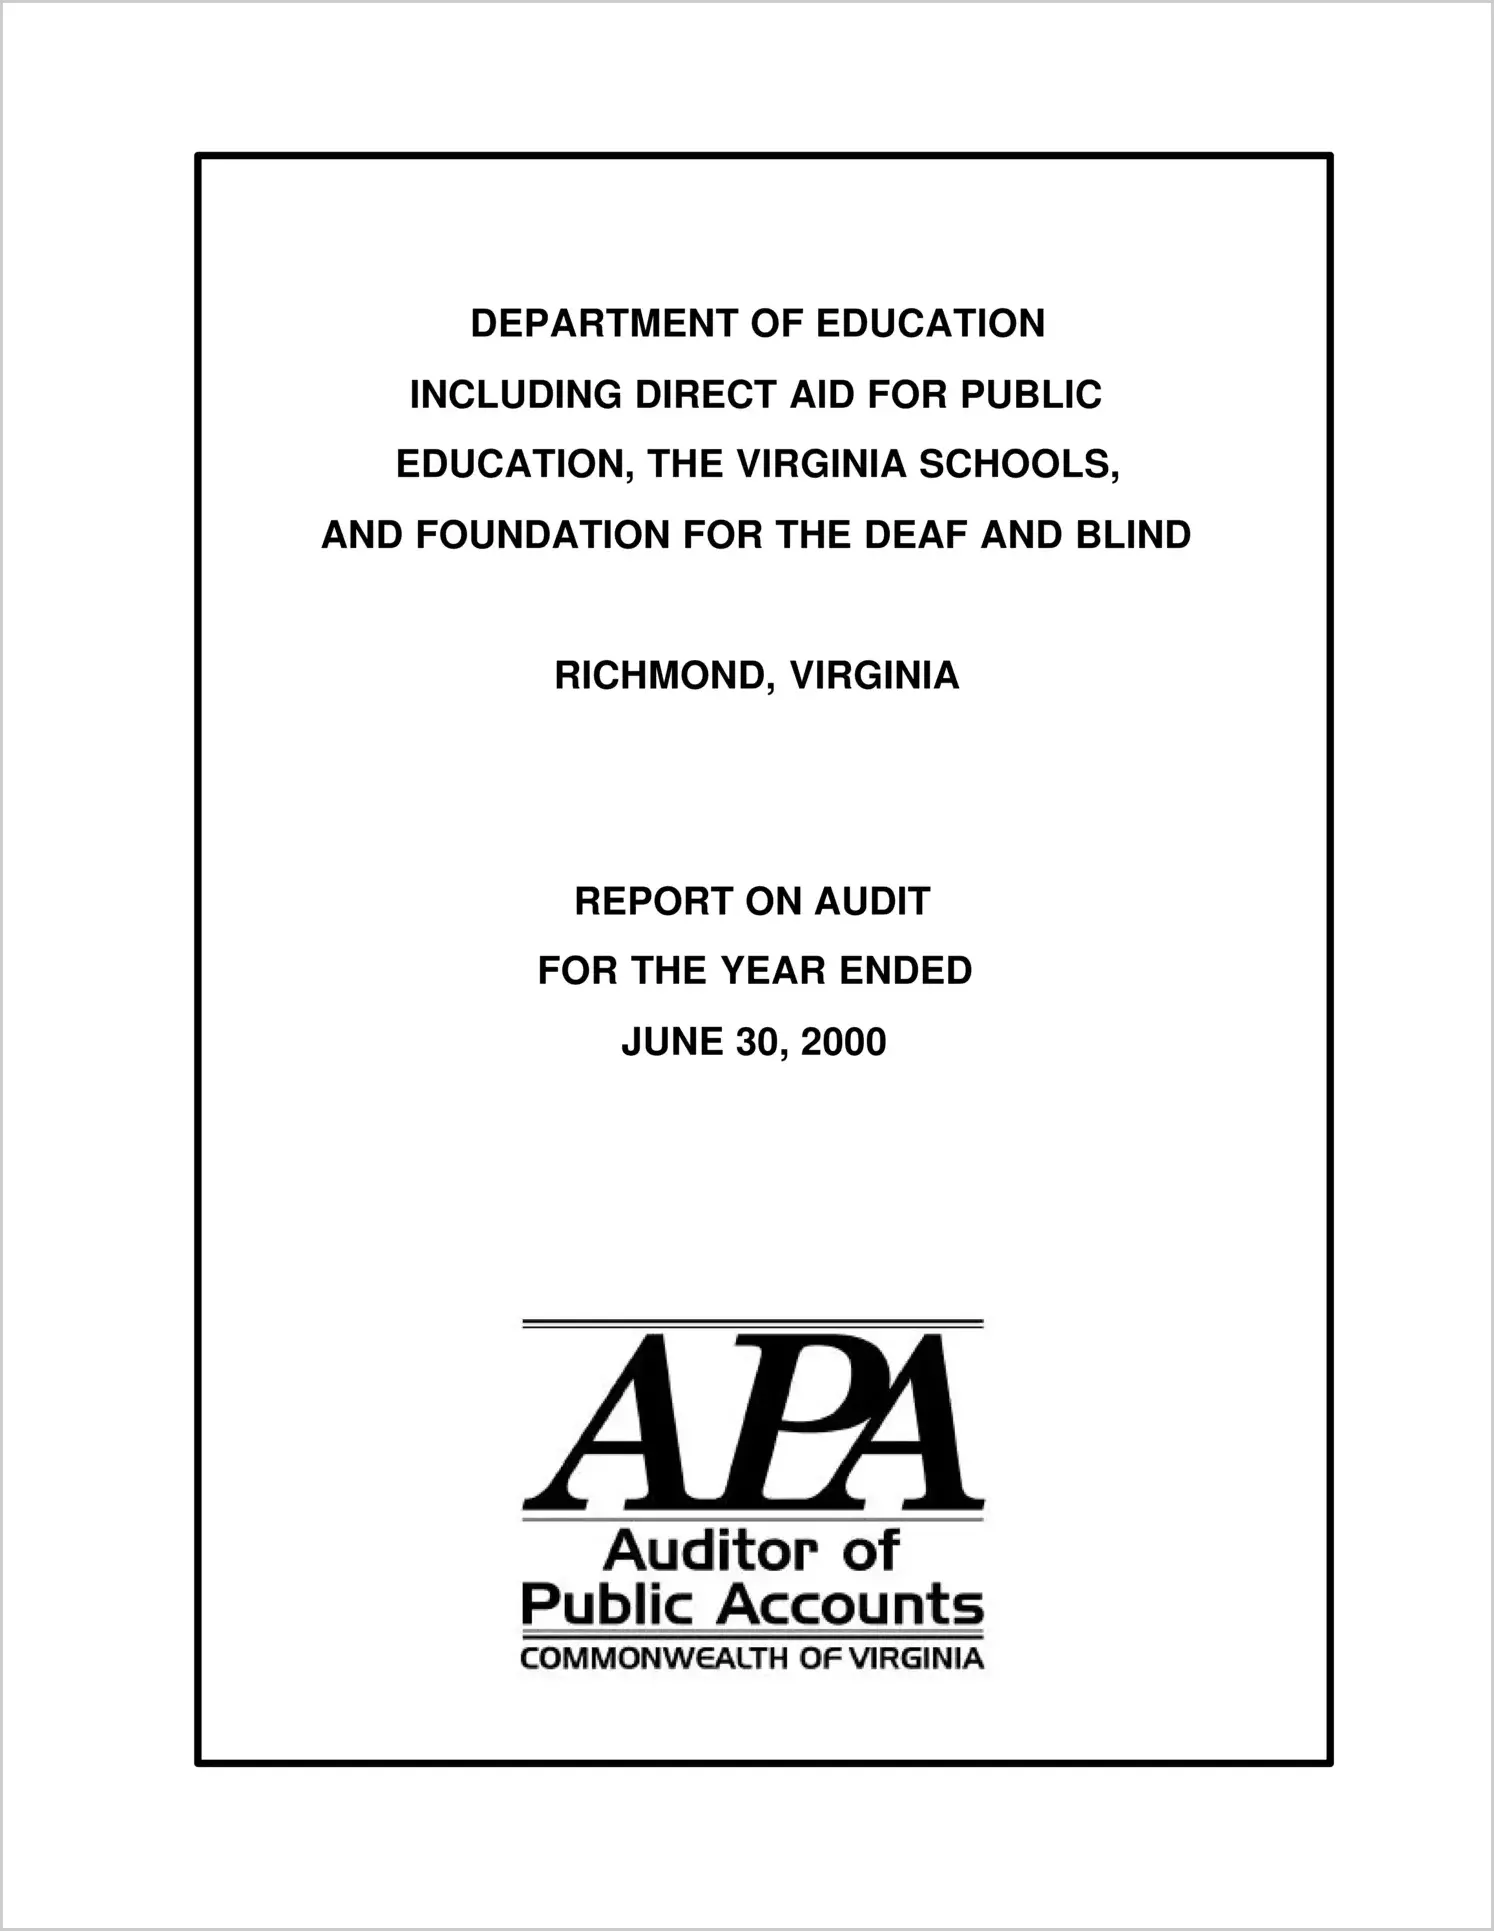 Department of Education Including Direct Aid to Public Education, the Virginia Schools for the Deaf and Blind, and the Virginia Schools for the Deaf and Blind Foundation for the year ended June 30, 2000